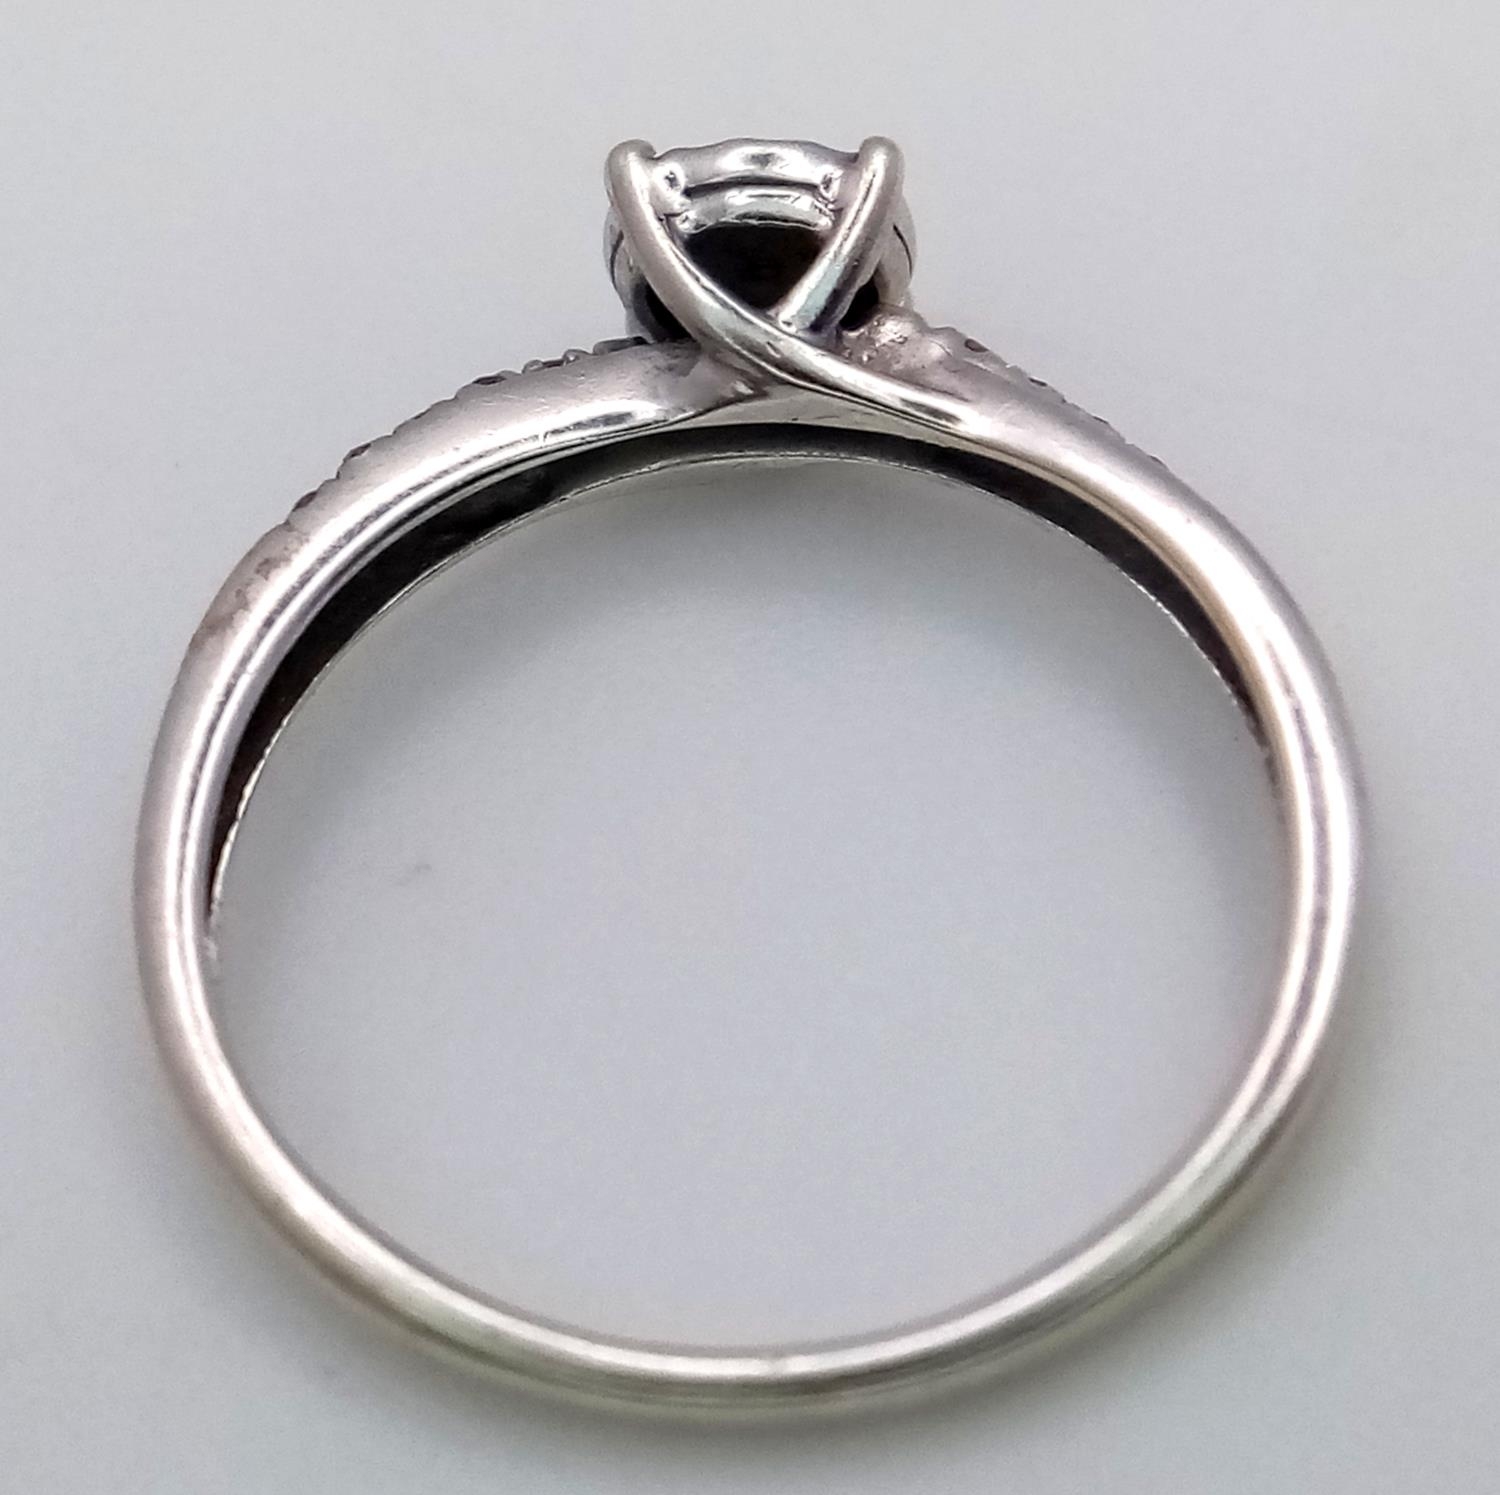 A 9K WHITE GOLD DIAMOND RING. Size K, 1.3g total weight. Ref: SC 9011 - Image 4 of 5